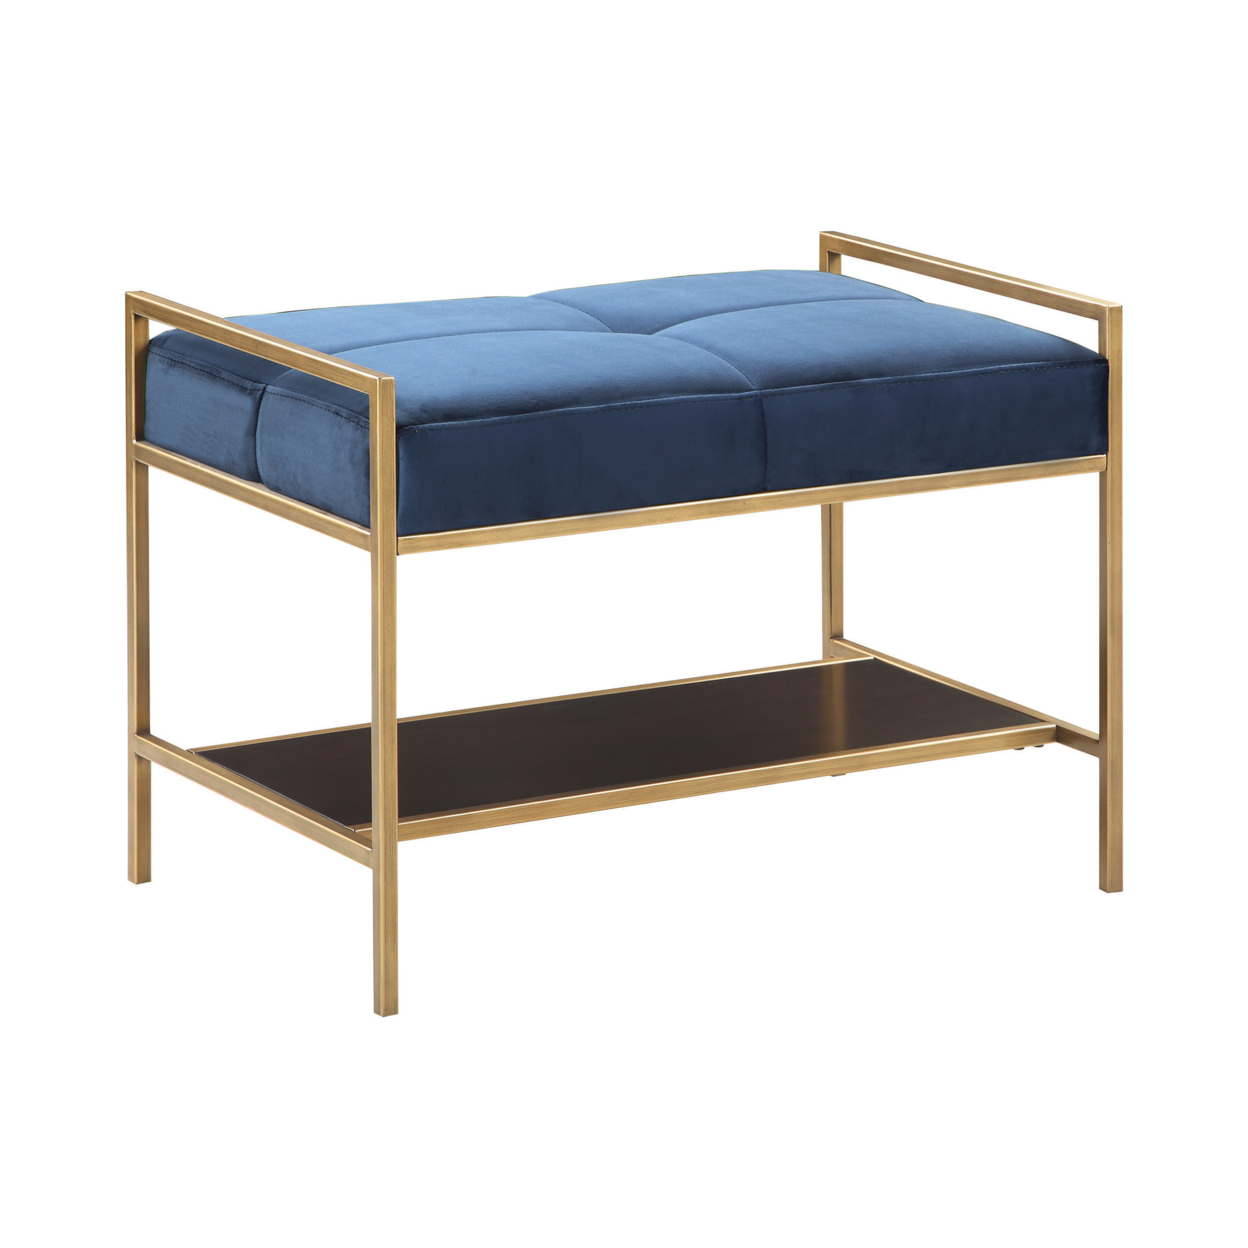 Metal Bench With Fabric Upholstered Plump Seats, Gold And Blue- Saltoro Sherpi